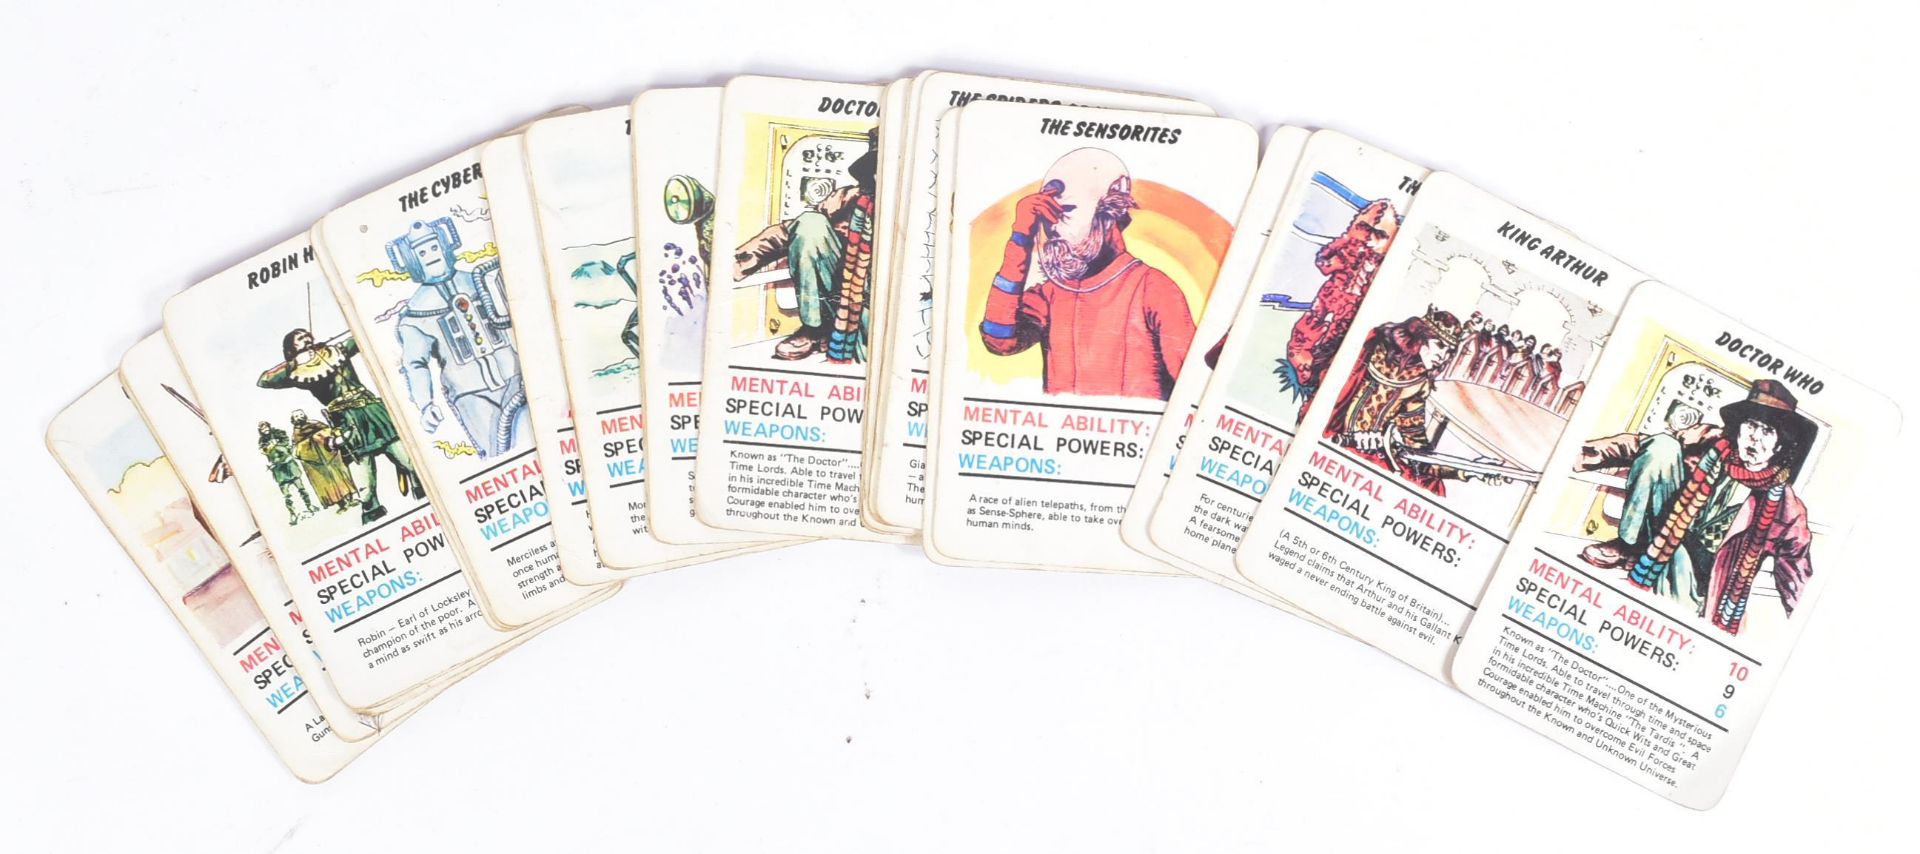 DOCTOR WHO - VINTAGE TRUMP CARD GAME & FIRST ADVENTURE - Image 4 of 6